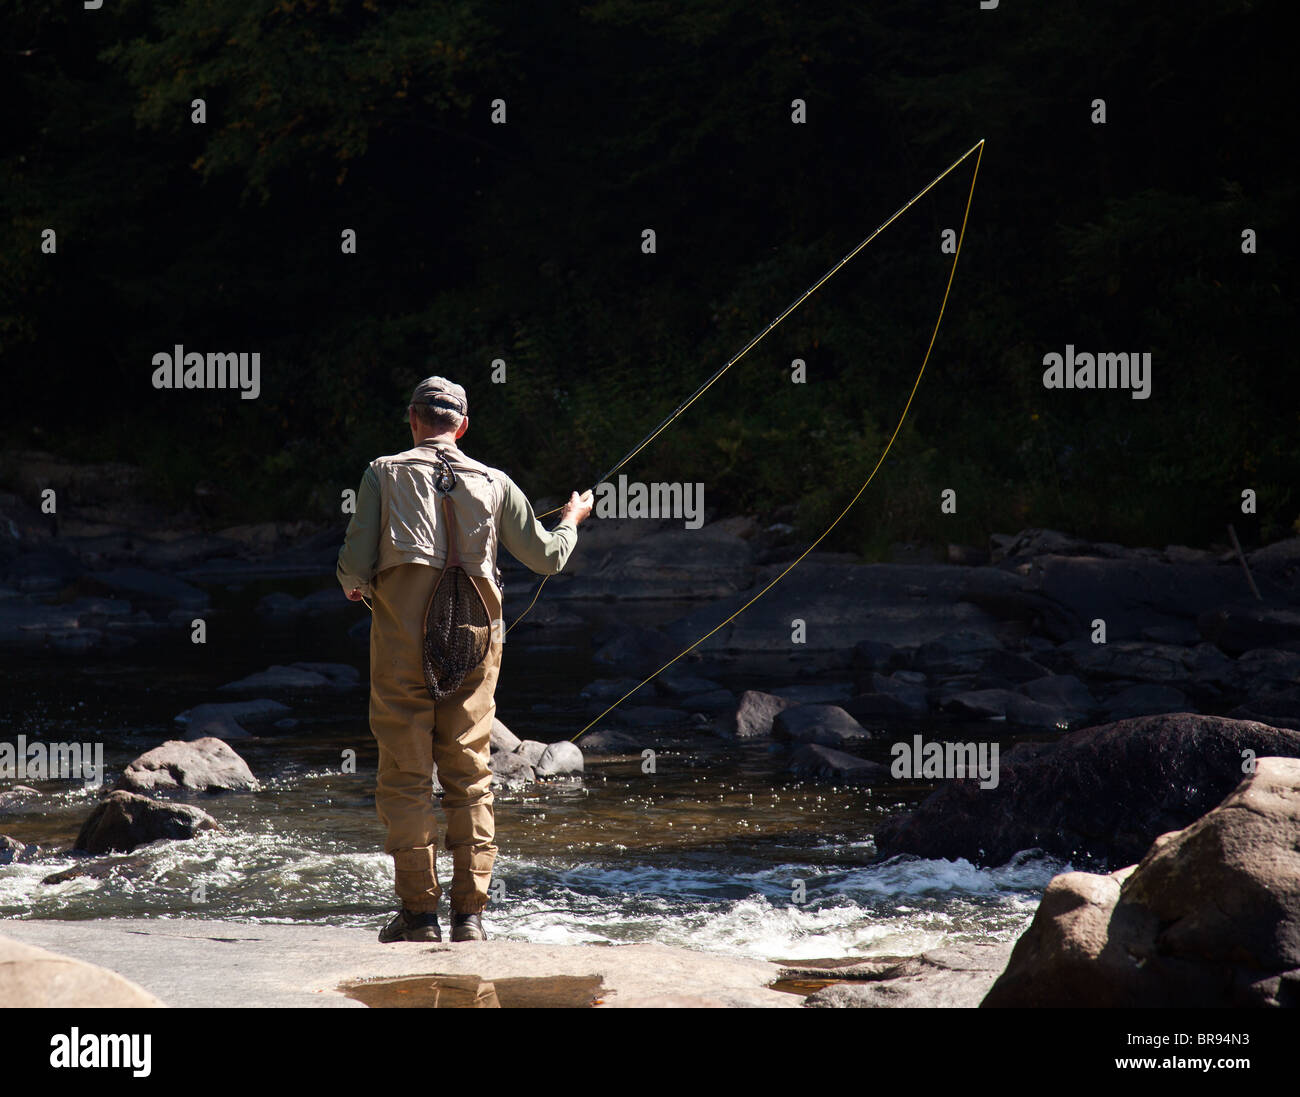 Angler flyfishing in a rapid river near swallow falls in Maryland Stock Photo